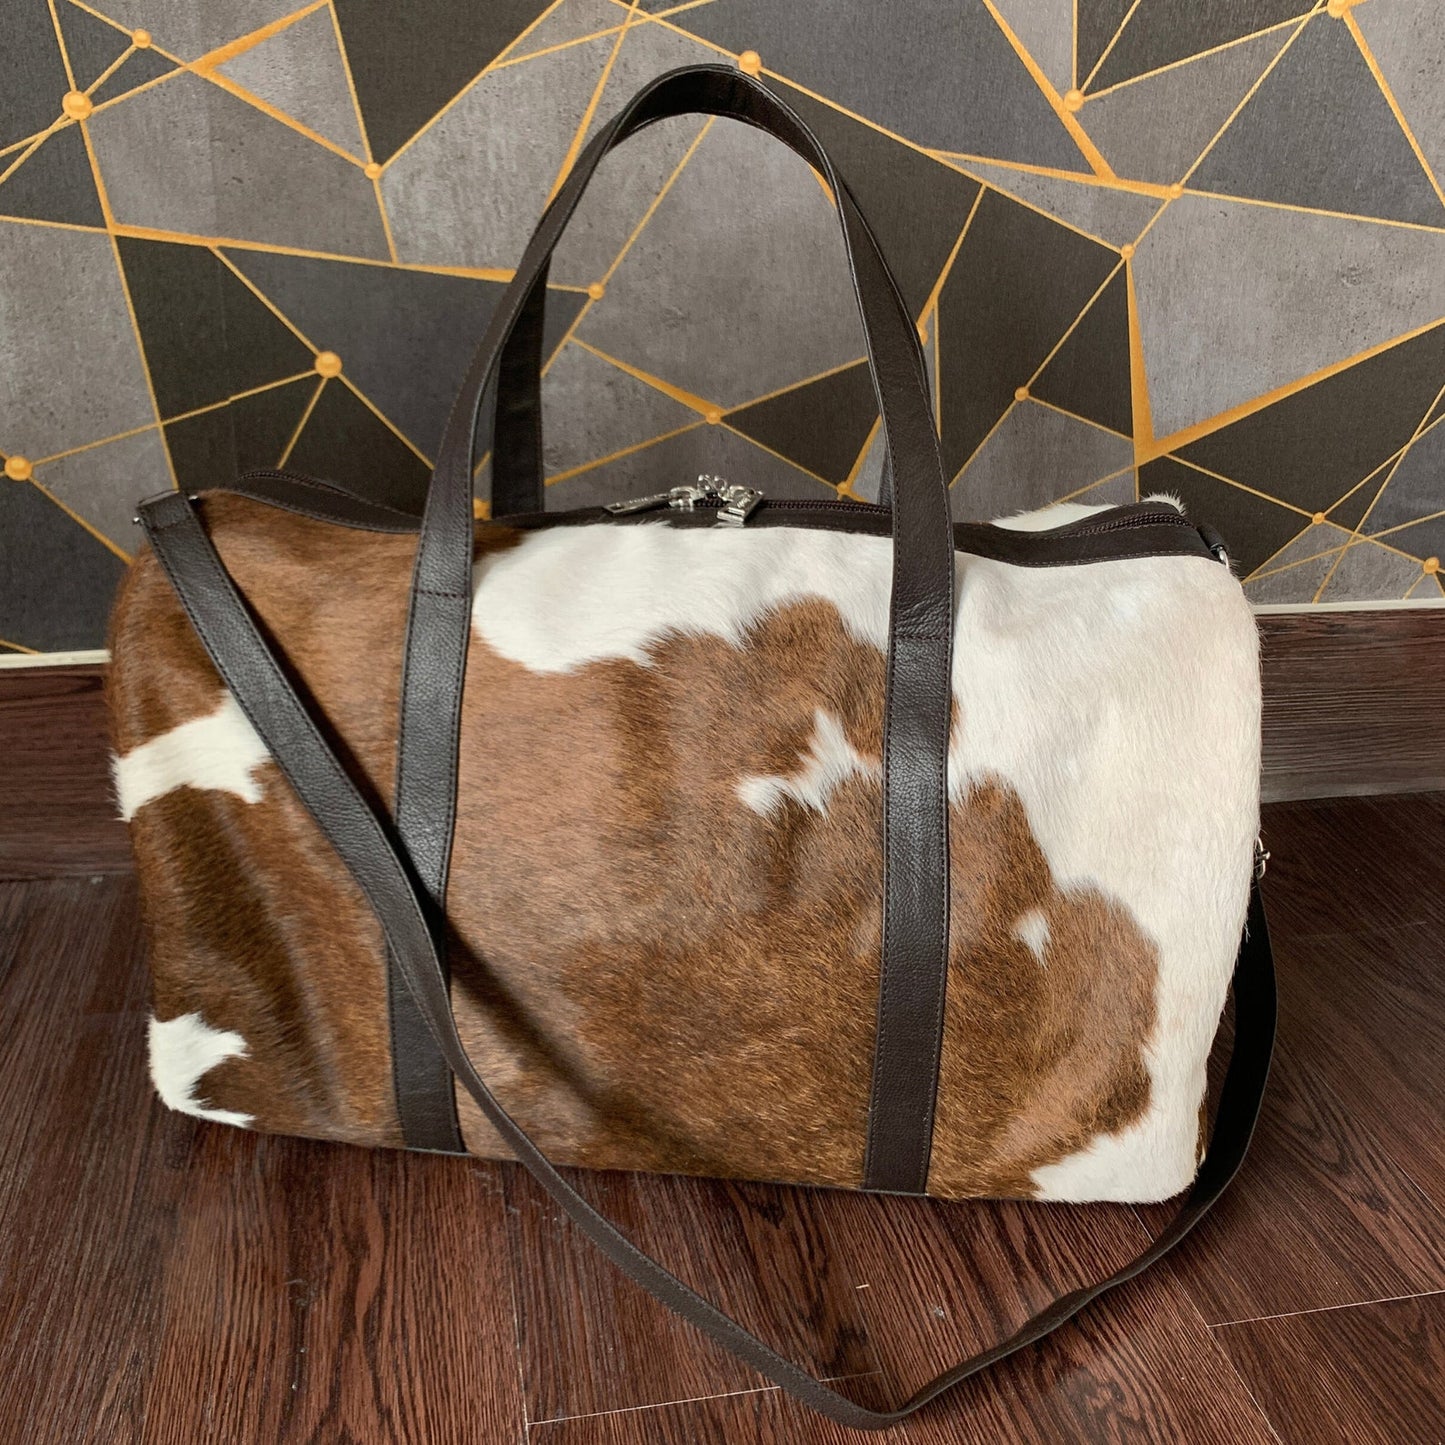  Pack smart with our versatile cowhide duffle bag. Functional choice.